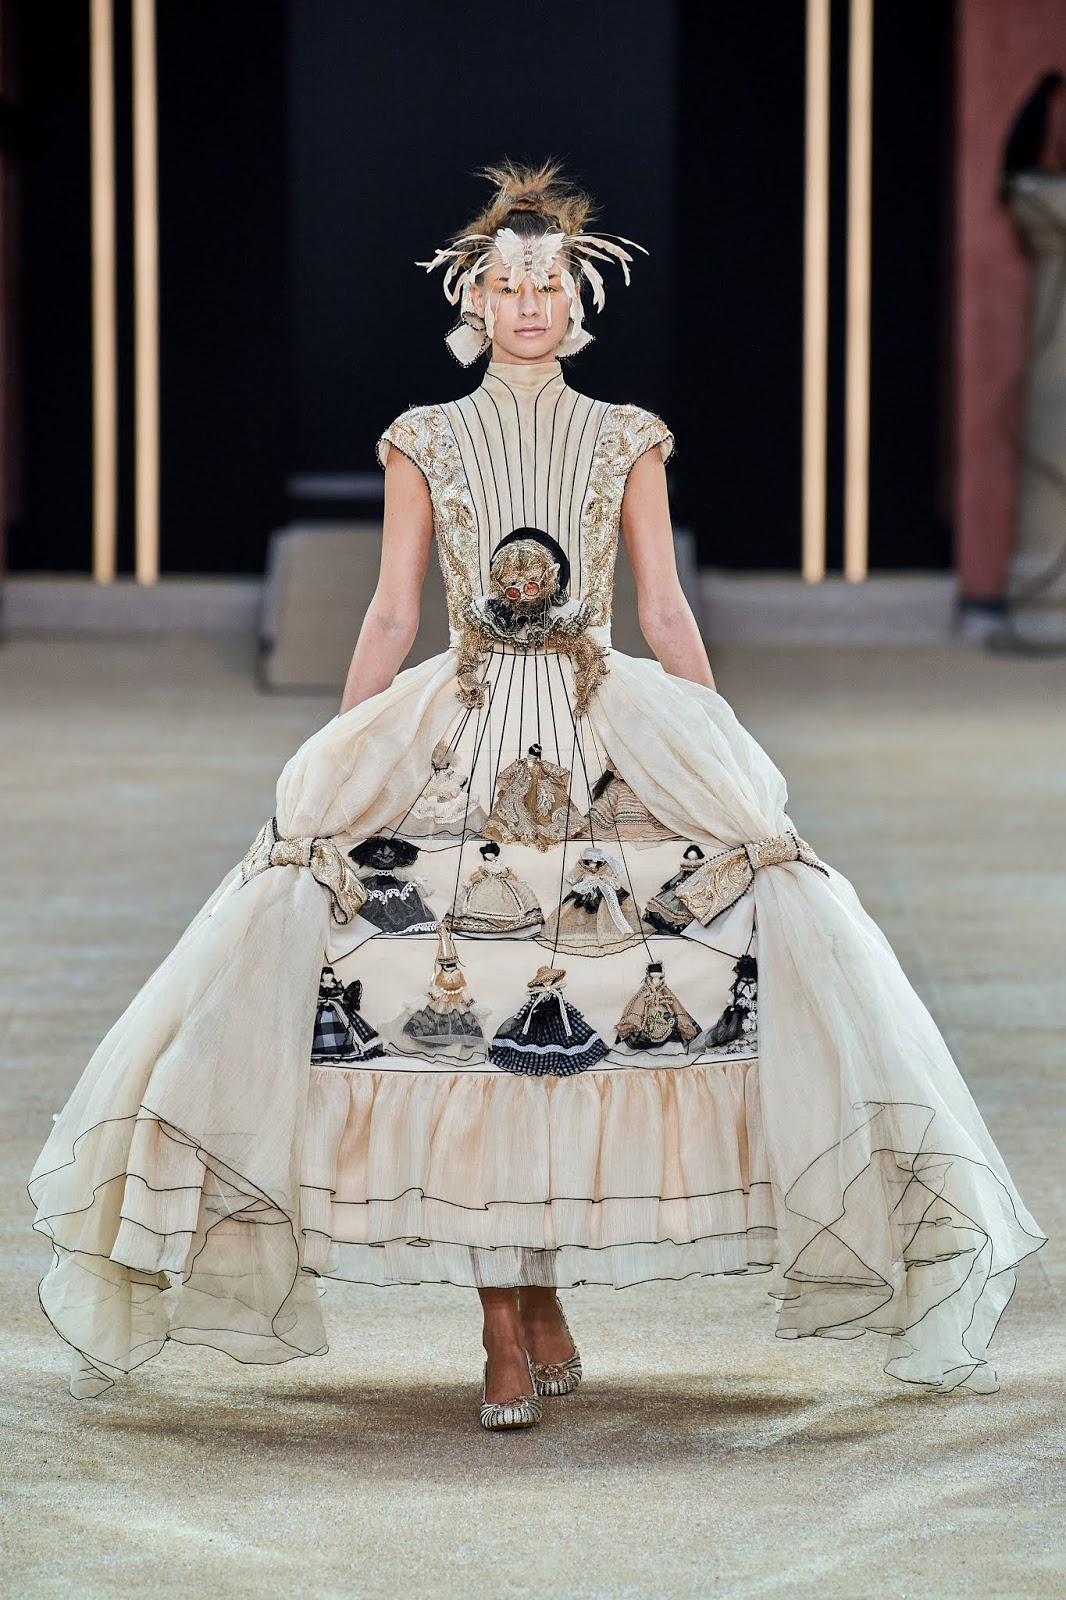 7 Funny Outfits You Can’t Believe You’ve Worn (2021) Crinoline